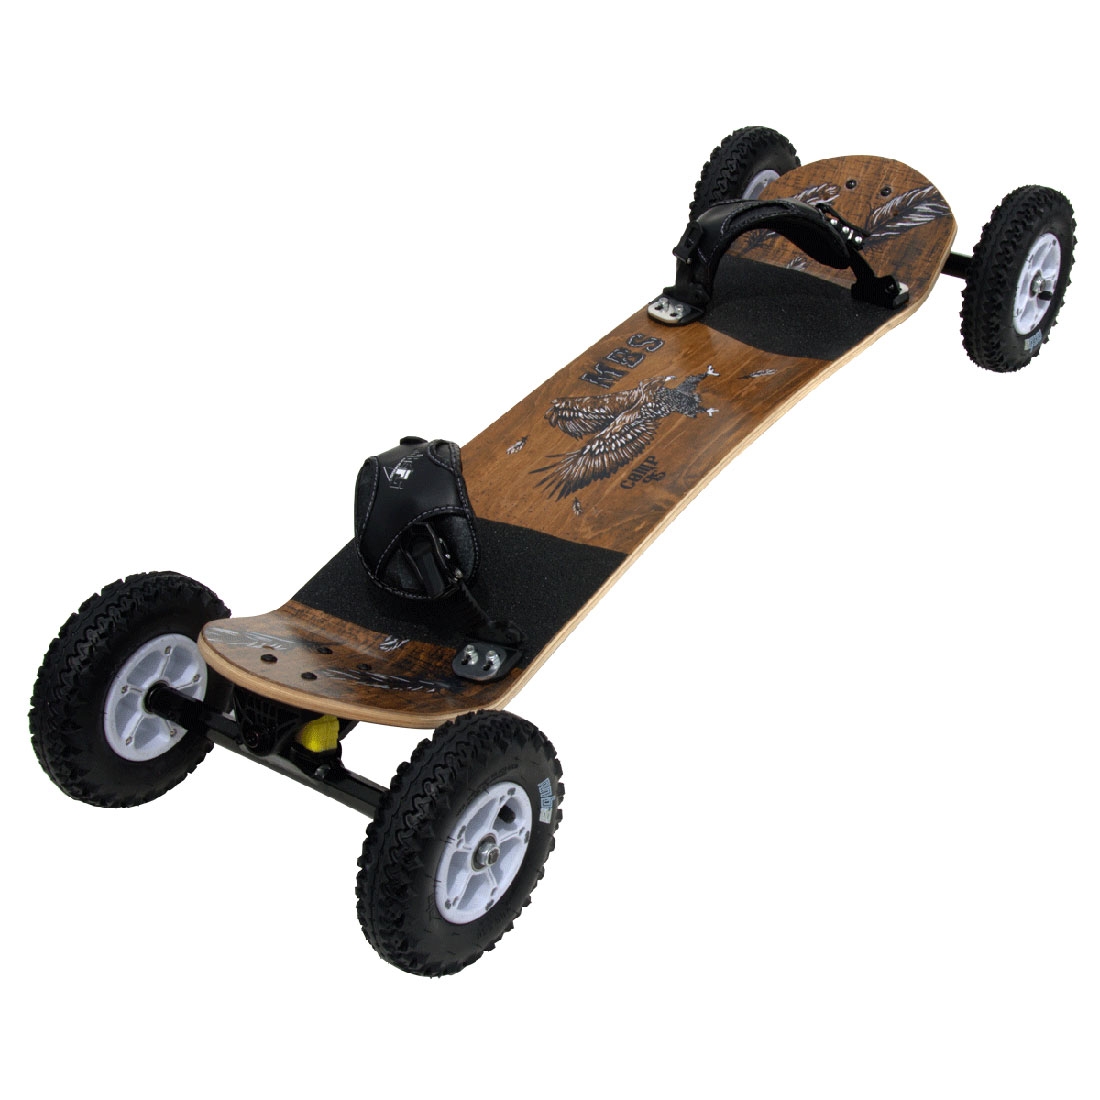 MBS Comp 95 Mountainboard – The Foiling Collective